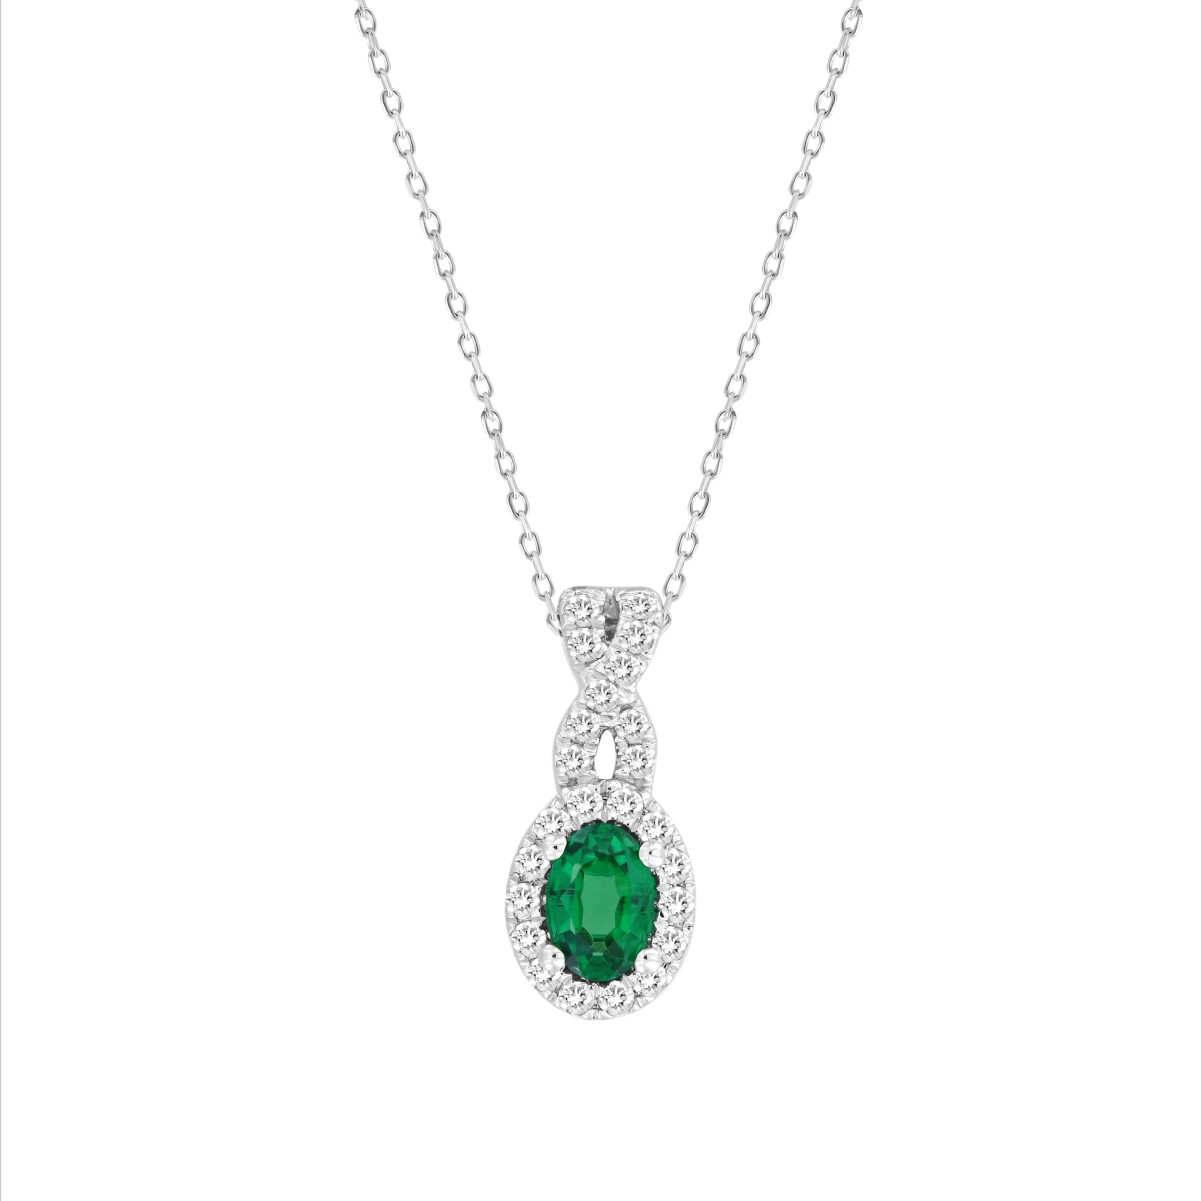 18K WHITE GOLD 3/4CT ROUND/OVAL DIAMOND LADIES PENDANT WITH CHAIN(COLOR STONE OVAL GREEN EMERALD DIAMOND 1/2CT)